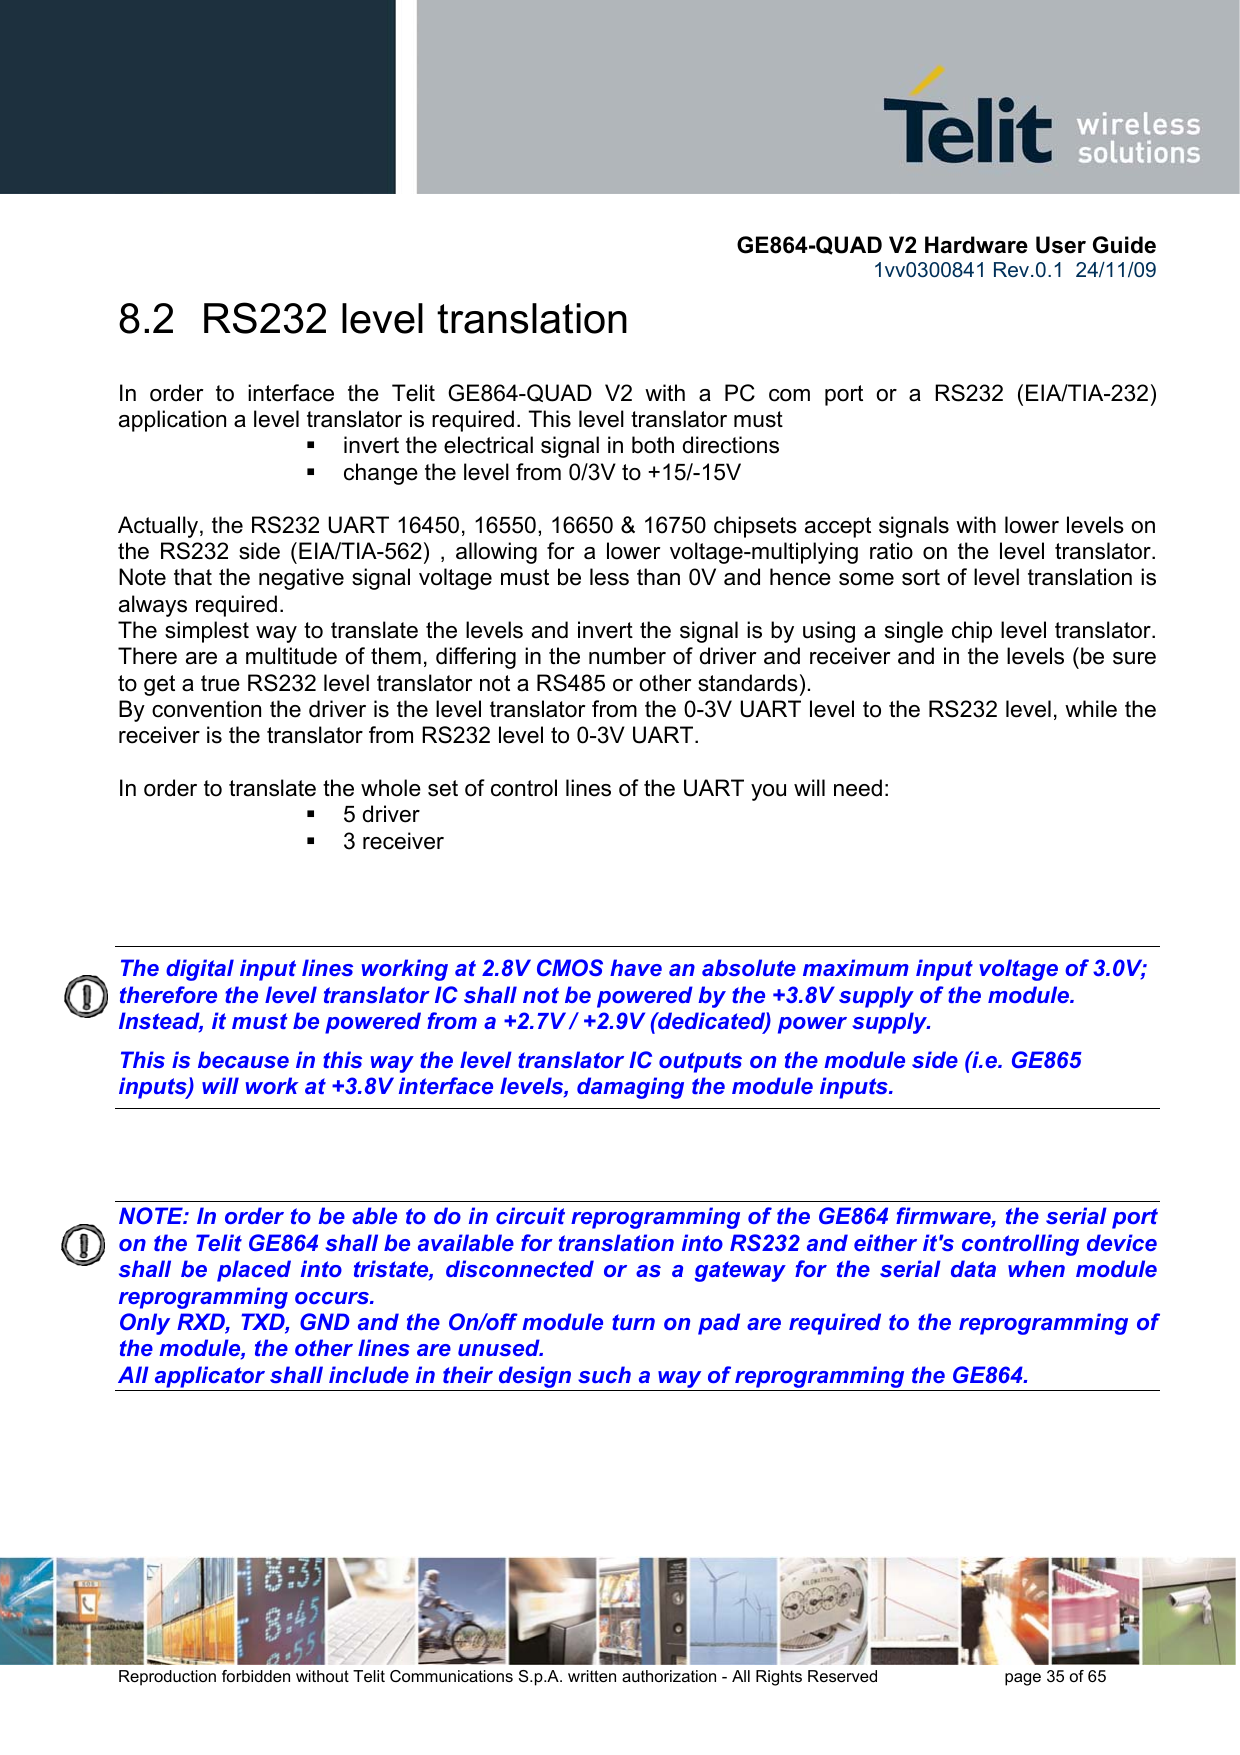       GE864-QUAD V2 Hardware User Guide 1vv0300841 Rev.0.1  24/11/09      Reproduction forbidden without Telit Communications S.p.A. written authorization - All Rights Reserved    page 35 of 65  8.2  RS232 level translation In order to interface the Telit GE864-QUAD V2 with a PC com port or a RS232 (EIA/TIA-232) application a level translator is required. This level translator must   invert the electrical signal in both directions   change the level from 0/3V to +15/-15V   Actually, the RS232 UART 16450, 16550, 16650 &amp; 16750 chipsets accept signals with lower levels on the RS232 side (EIA/TIA-562) , allowing for a lower voltage-multiplying ratio on the level translator. Note that the negative signal voltage must be less than 0V and hence some sort of level translation is always required.  The simplest way to translate the levels and invert the signal is by using a single chip level translator. There are a multitude of them, differing in the number of driver and receiver and in the levels (be sure to get a true RS232 level translator not a RS485 or other standards). By convention the driver is the level translator from the 0-3V UART level to the RS232 level, while the receiver is the translator from RS232 level to 0-3V UART.  In order to translate the whole set of control lines of the UART you will need:  5 driver  3 receiver    The digital input lines working at 2.8V CMOS have an absolute maximum input voltage of 3.0V; therefore the level translator IC shall not be powered by the +3.8V supply of the module. Instead, it must be powered from a +2.7V / +2.9V (dedicated) power supply. This is because in this way the level translator IC outputs on the module side (i.e. GE865 inputs) will work at +3.8V interface levels, damaging the module inputs.    NOTE: In order to be able to do in circuit reprogramming of the GE864 firmware, the serial port on the Telit GE864 shall be available for translation into RS232 and either it&apos;s controlling device shall be placed into tristate, disconnected or as a gateway for the serial data when module reprogramming occurs. Only RXD, TXD, GND and the On/off module turn on pad are required to the reprogramming of the module, the other lines are unused. All applicator shall include in their design such a way of reprogramming the GE864.    